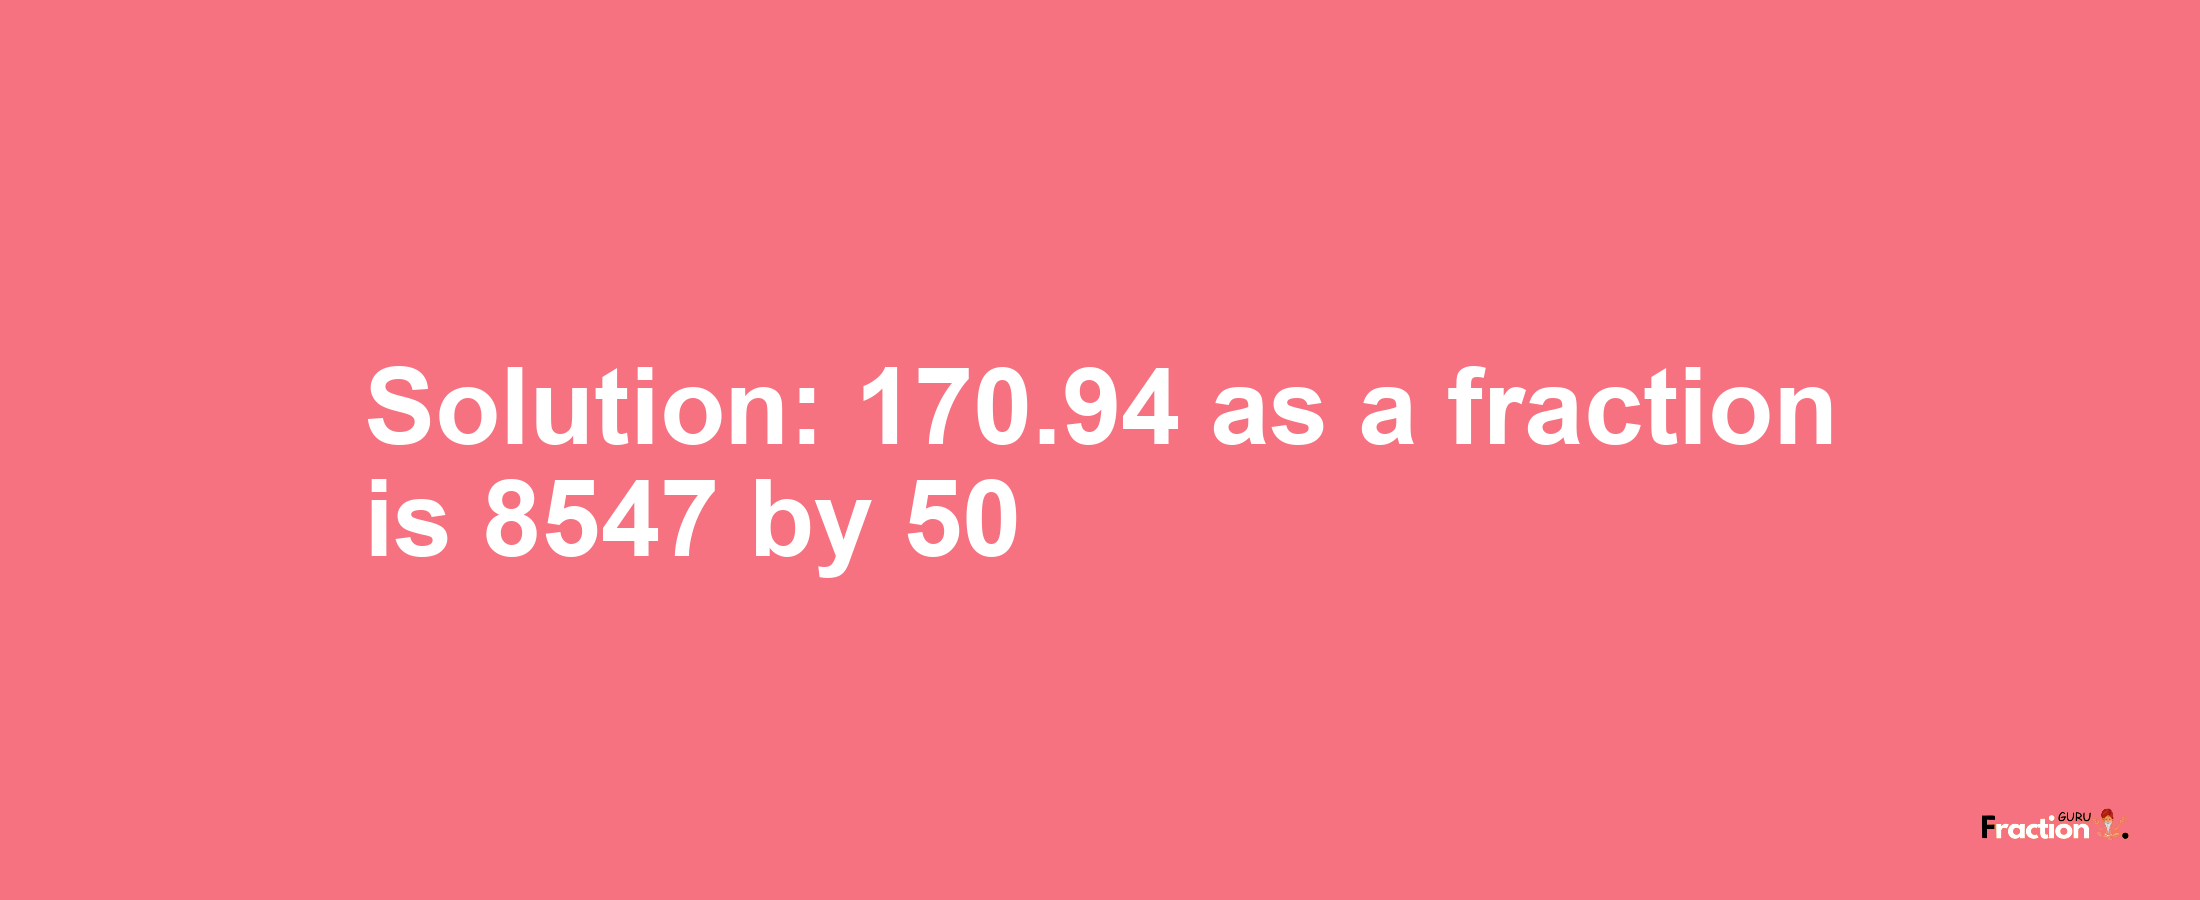 Solution:170.94 as a fraction is 8547/50